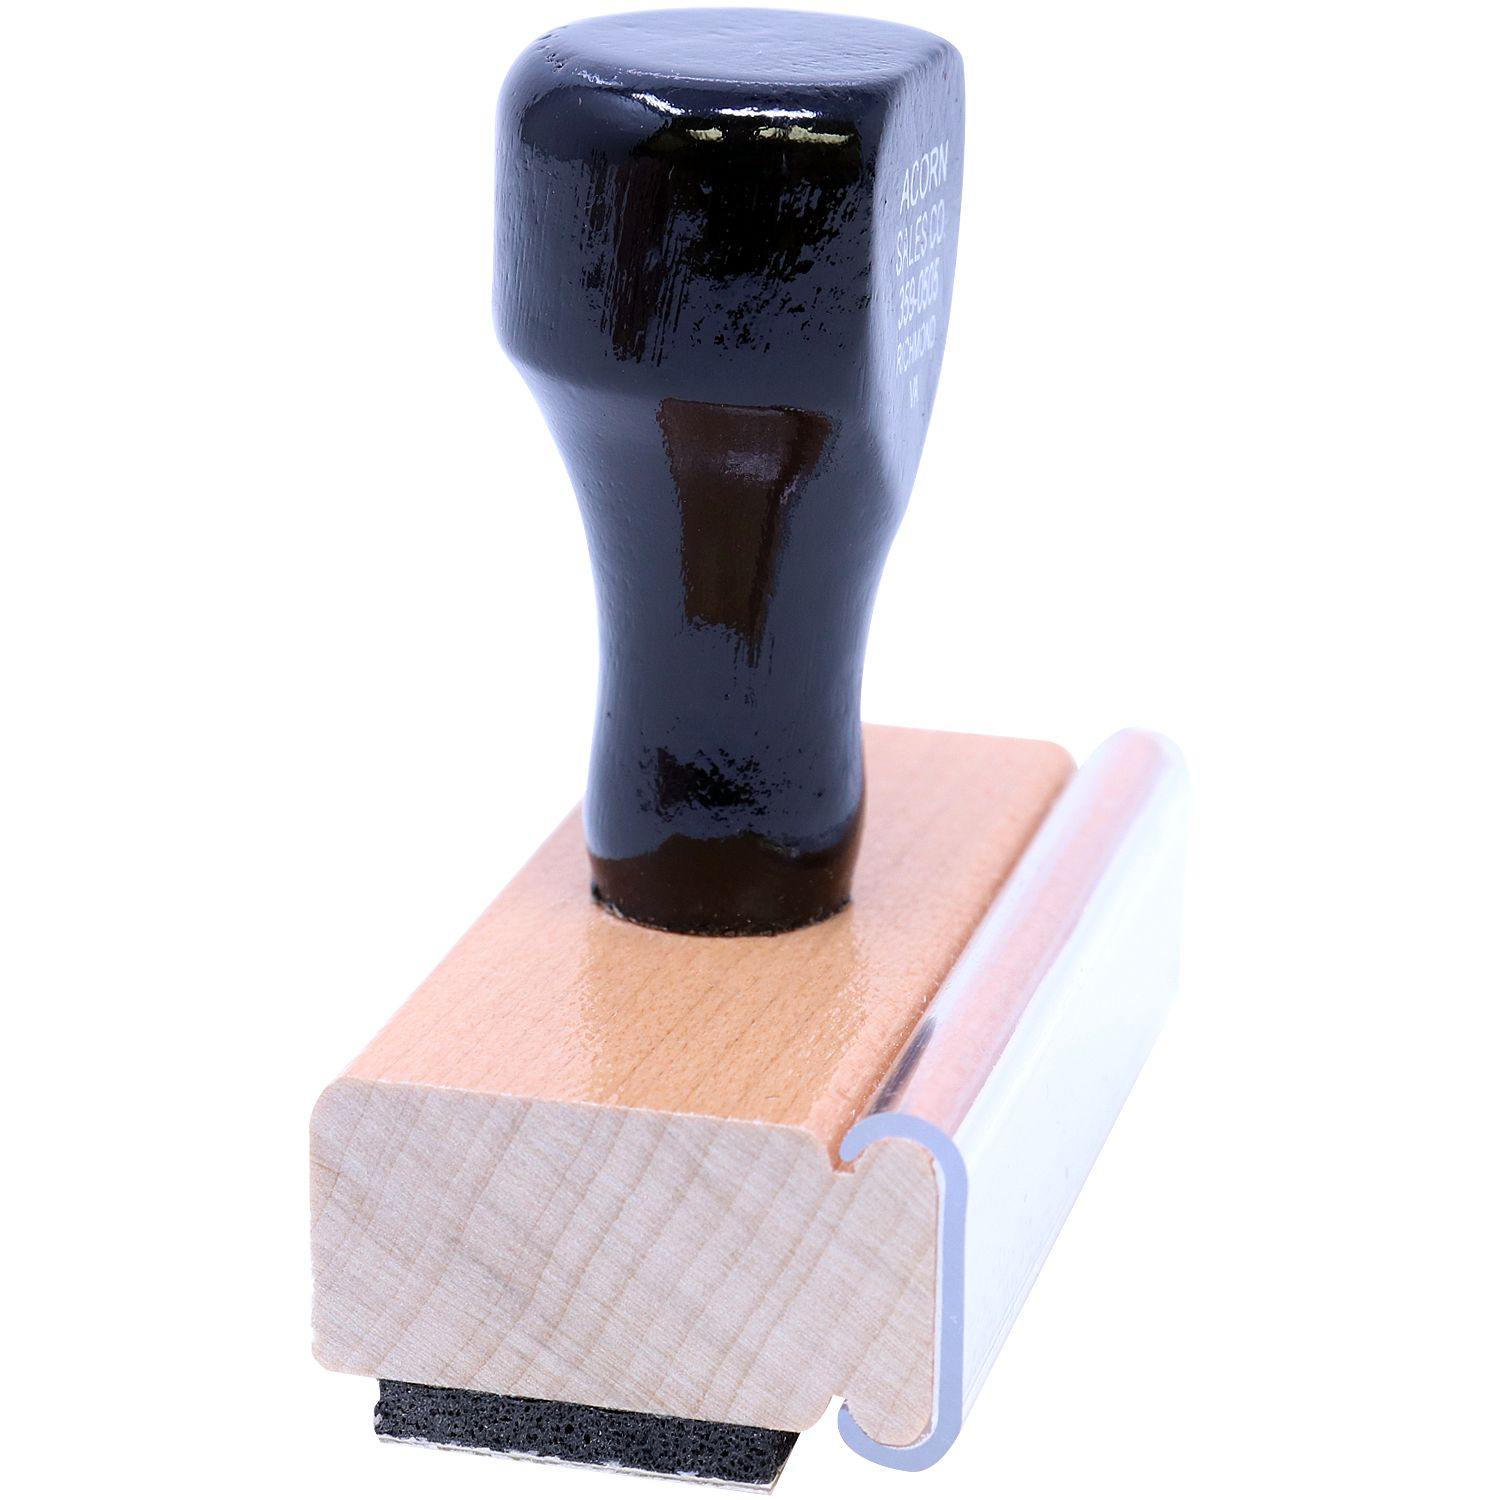 Media Mail Rubber Stamp - Engineer Seal Stamps - Brand_Acorn, Impression Size_Small, Stamp Type_Regular Stamp, Type of Use_Postal & Mailing